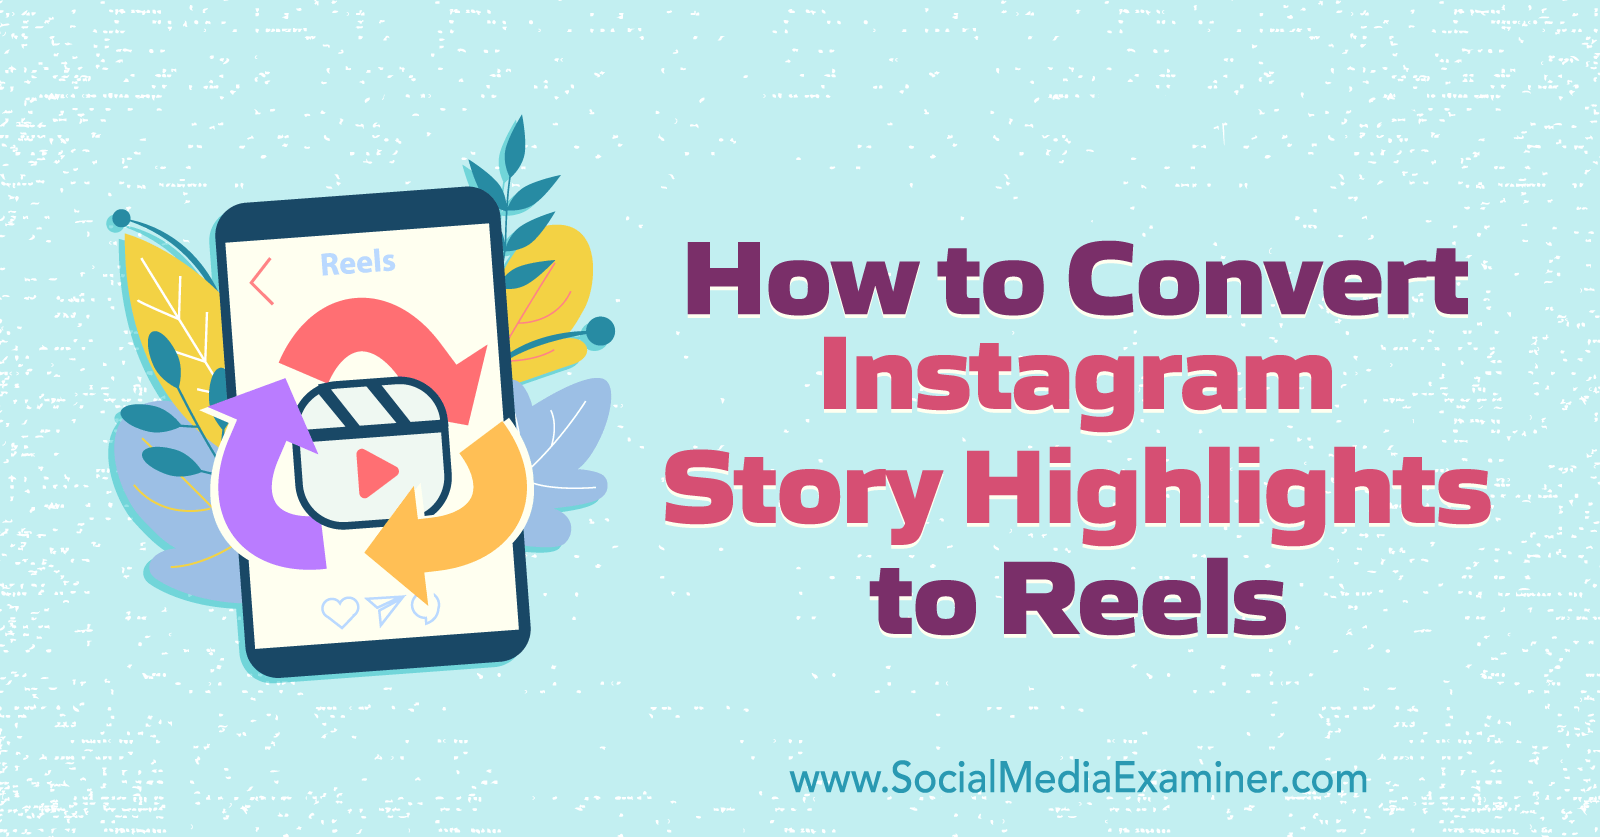 How to Convert Instagram Story Highlights to Reels by Anna Sonnenberg on Social Media Examiner.